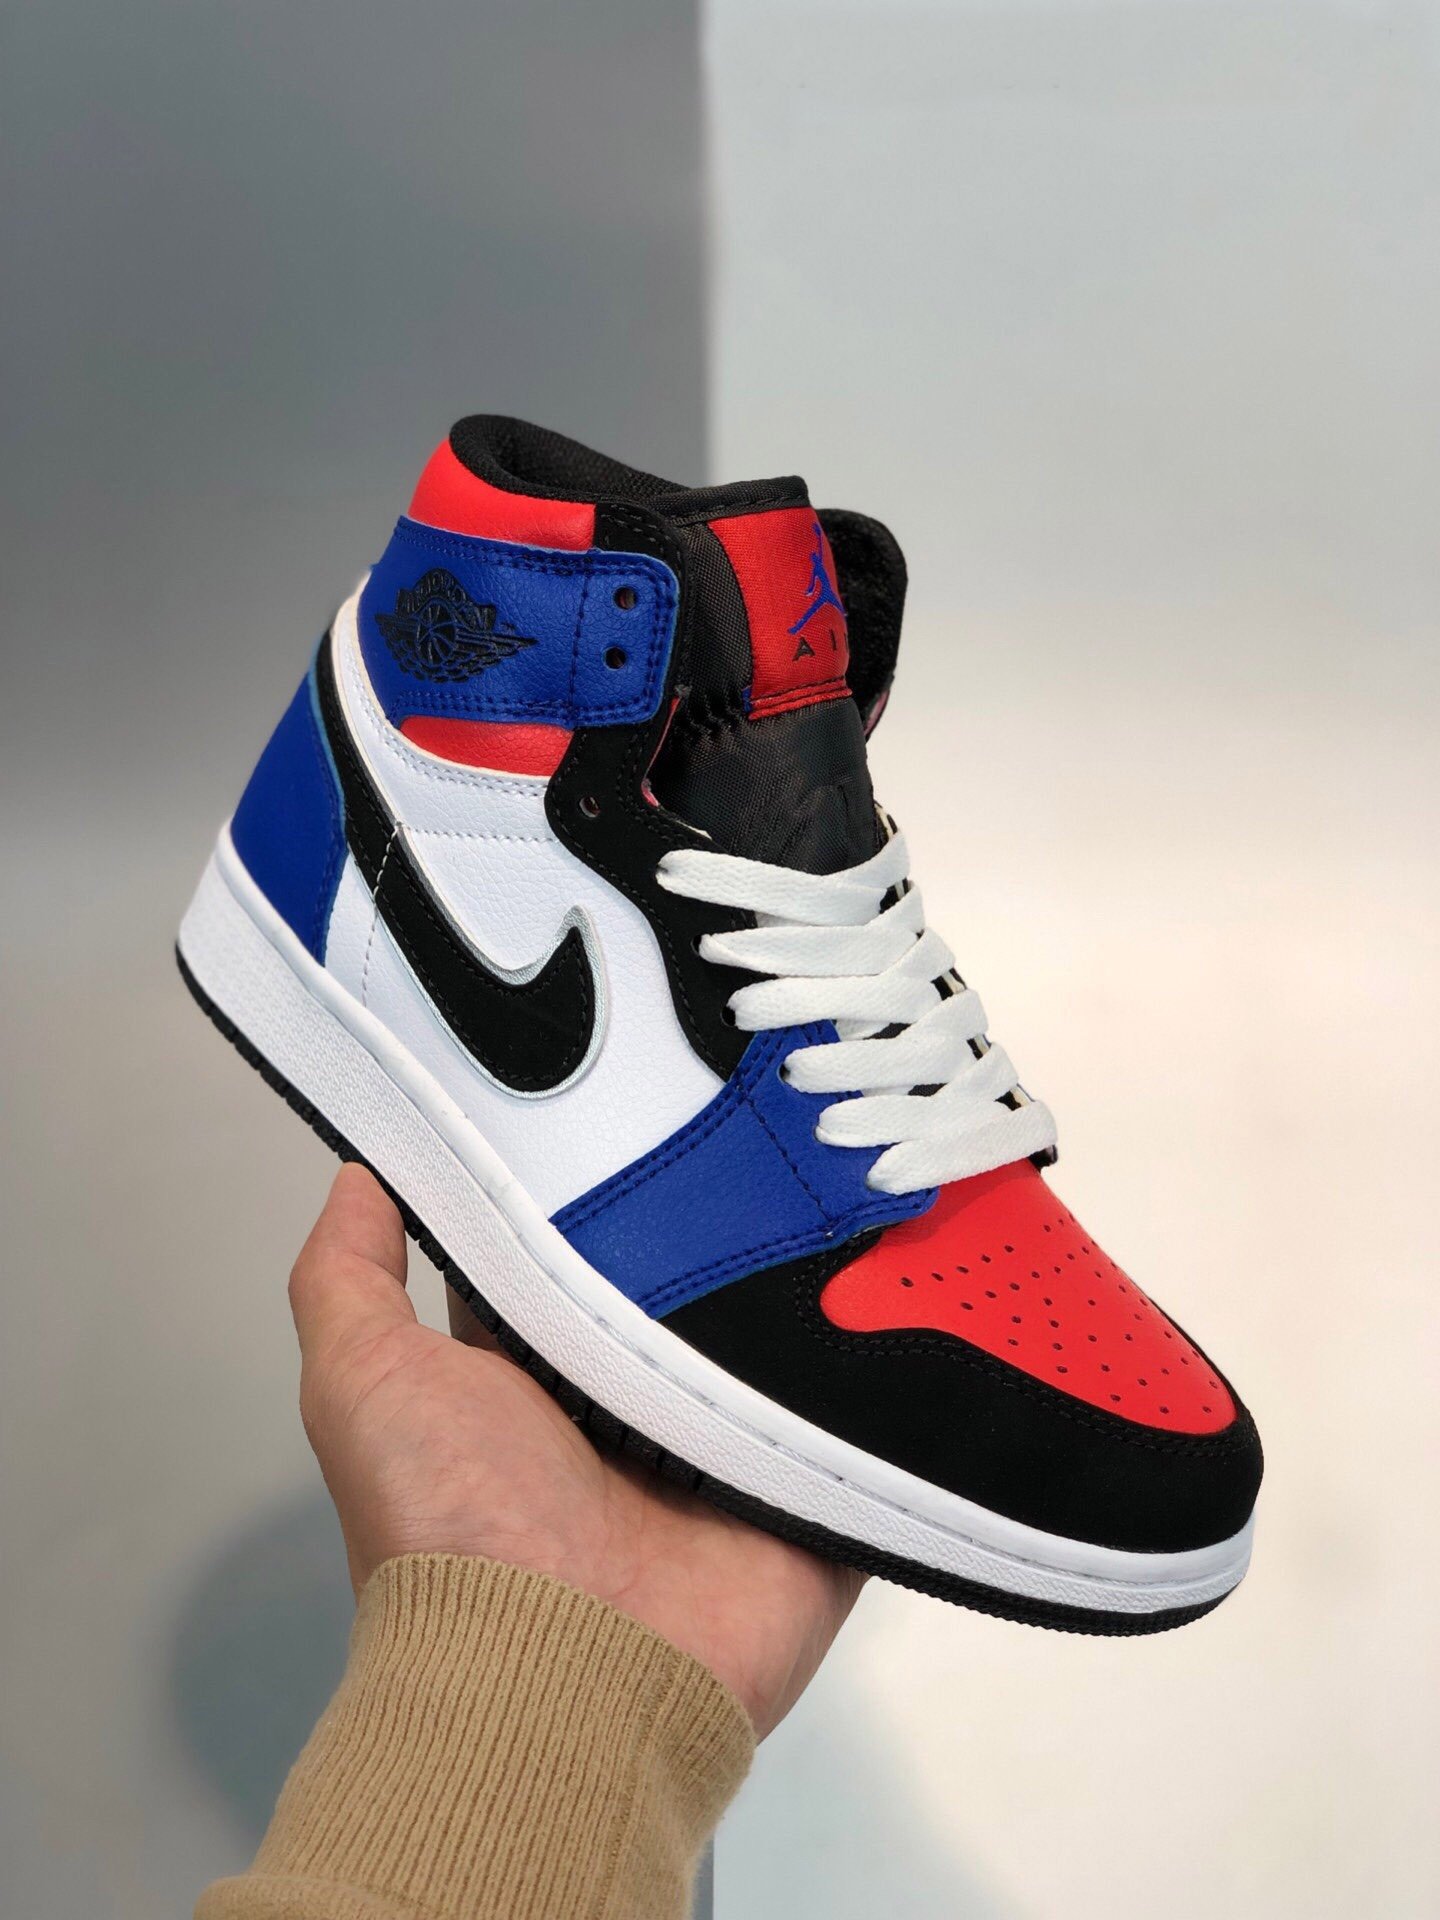 Sneakers PABLOSKY 288219 S Charol Negro Mid 'Top 3' Blue Red Black White 554724-124 Juzsports Store